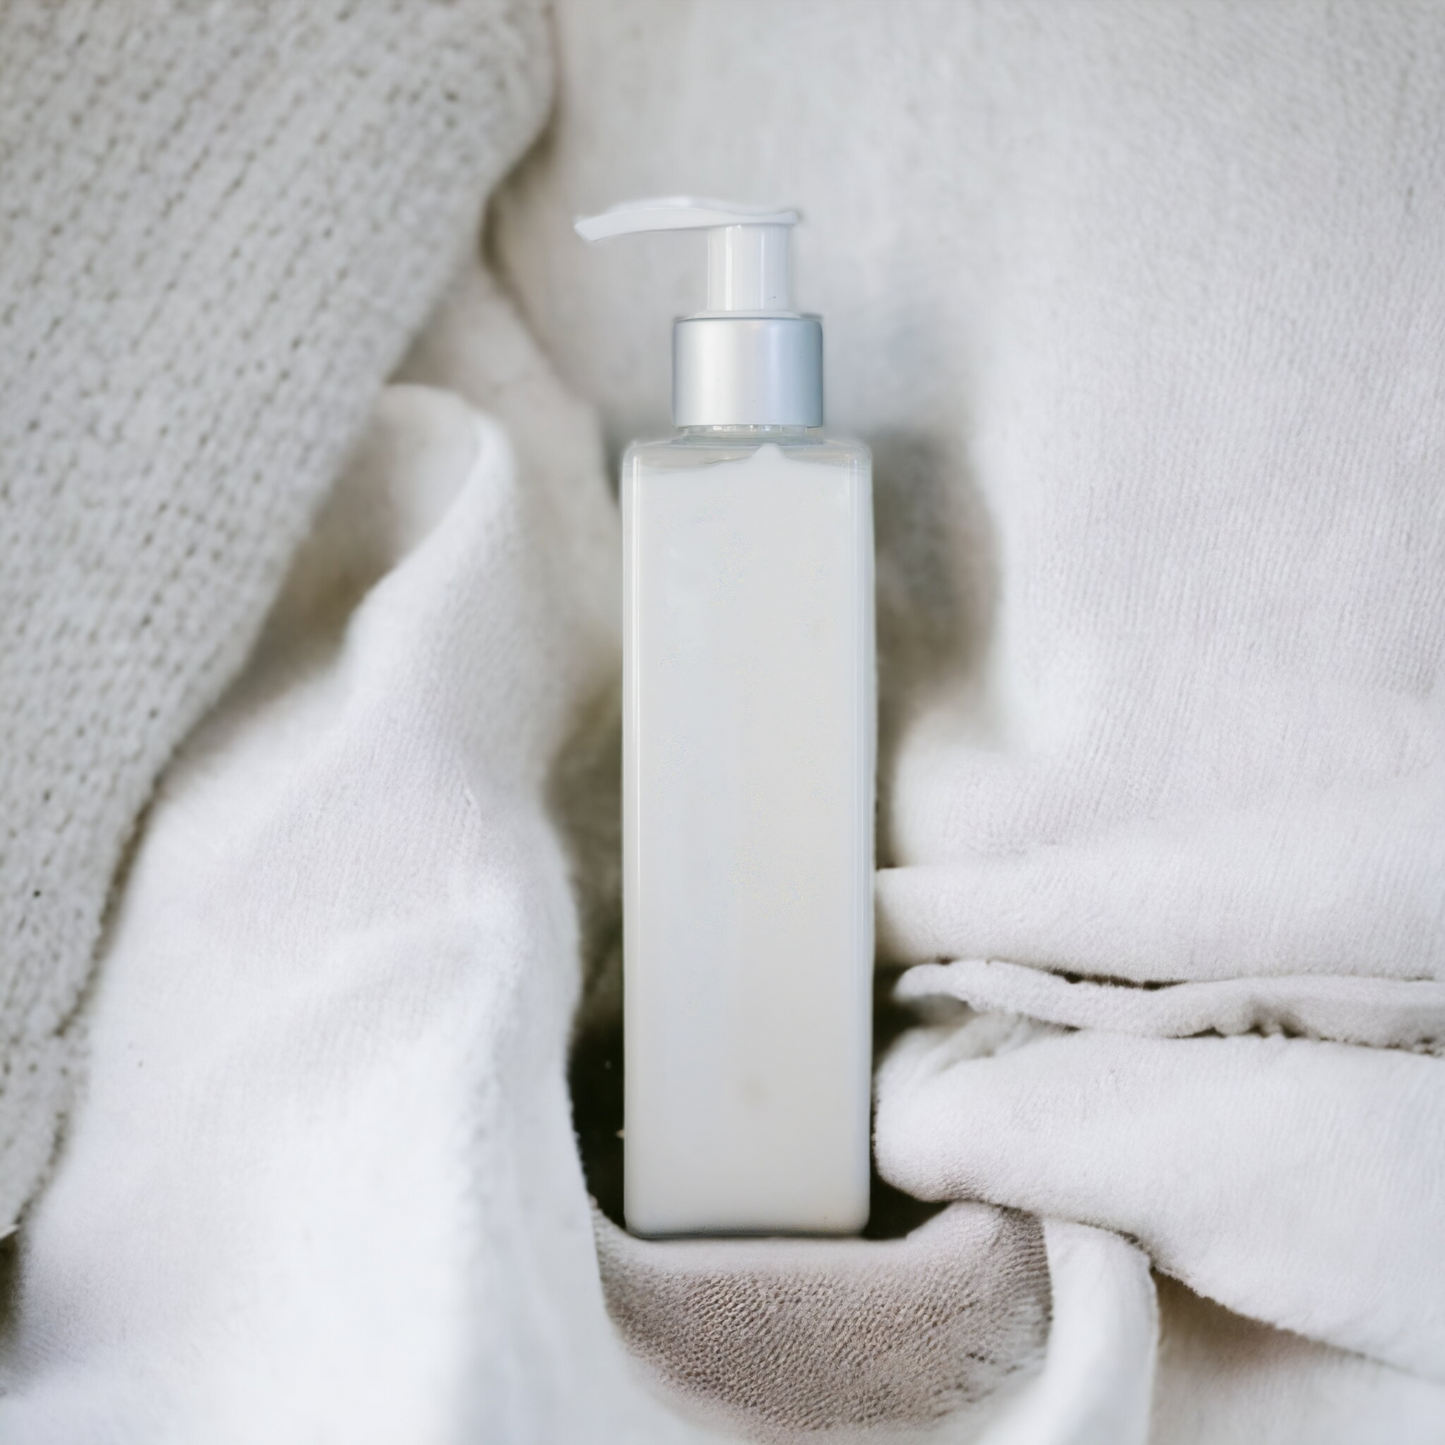 Clean Cotton Lotion with Sheep Milk